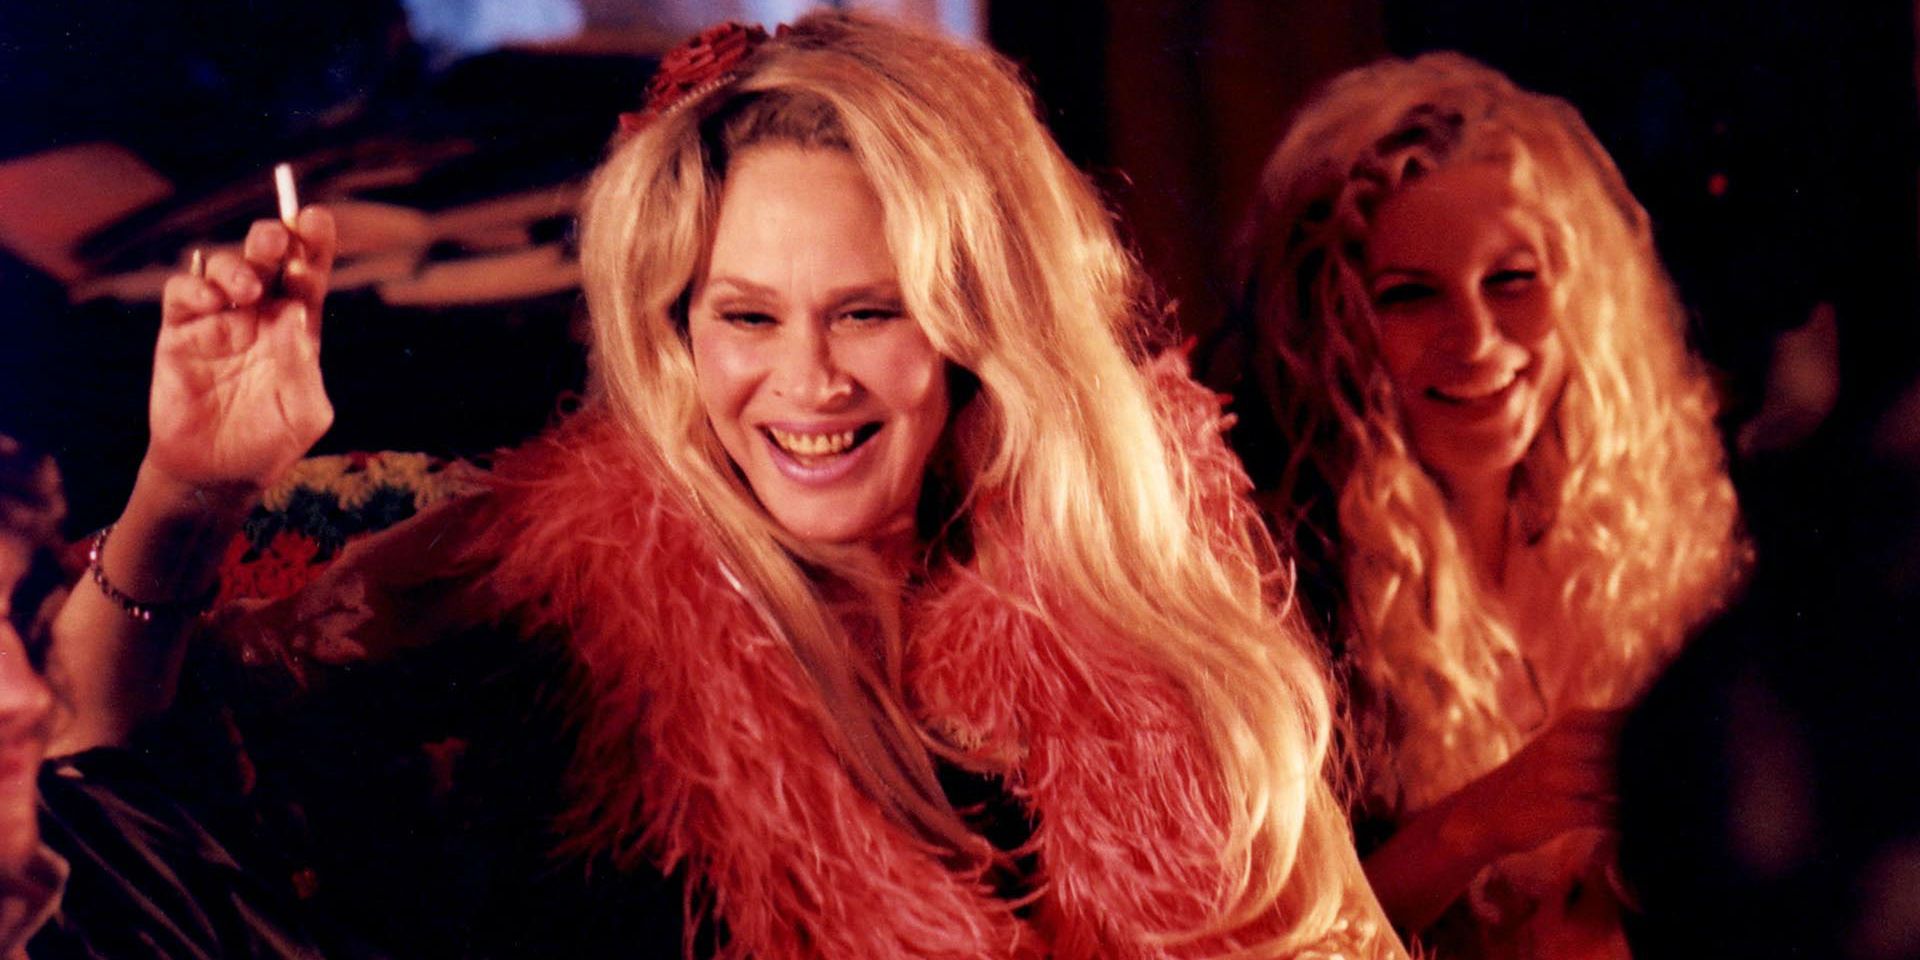 Karen Black as Mama Firefly laughing with Baby in House of 1000 Corpses